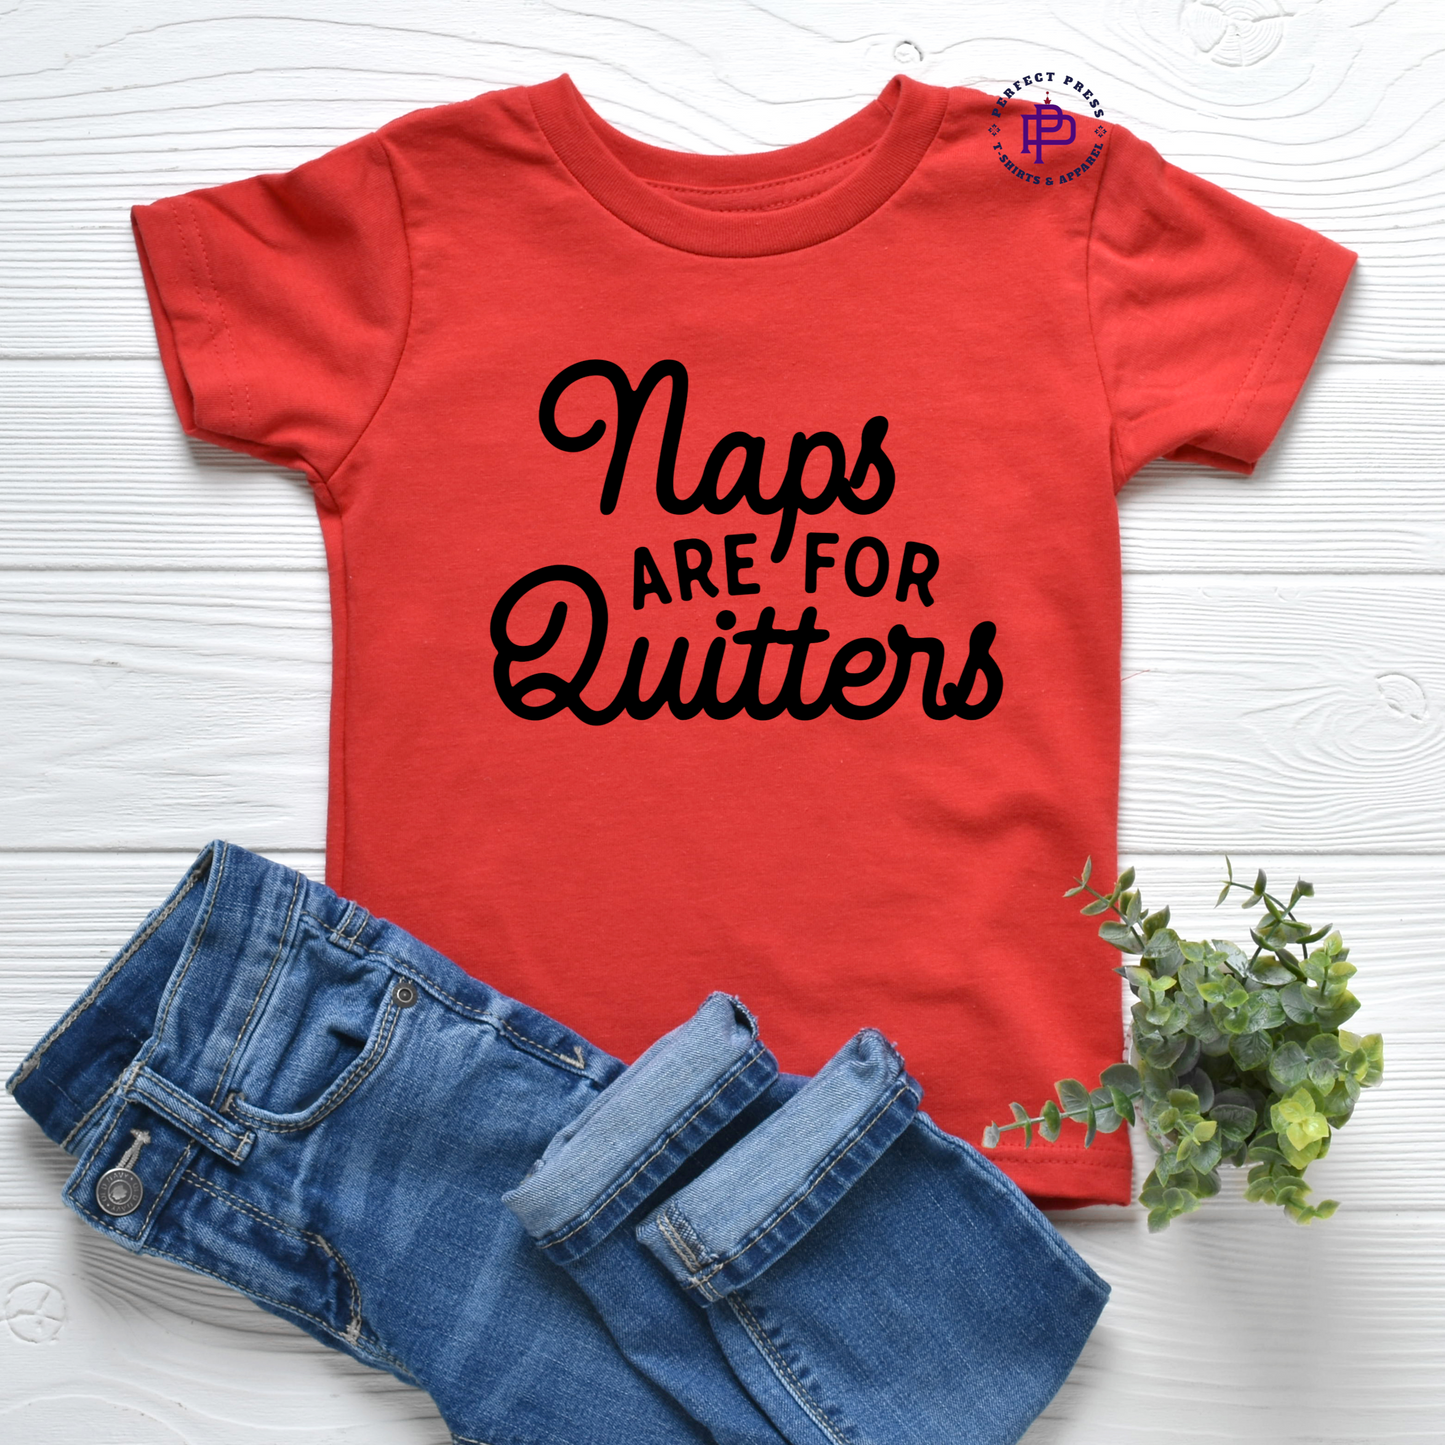 NAPS ARE FOR QUITTERS...